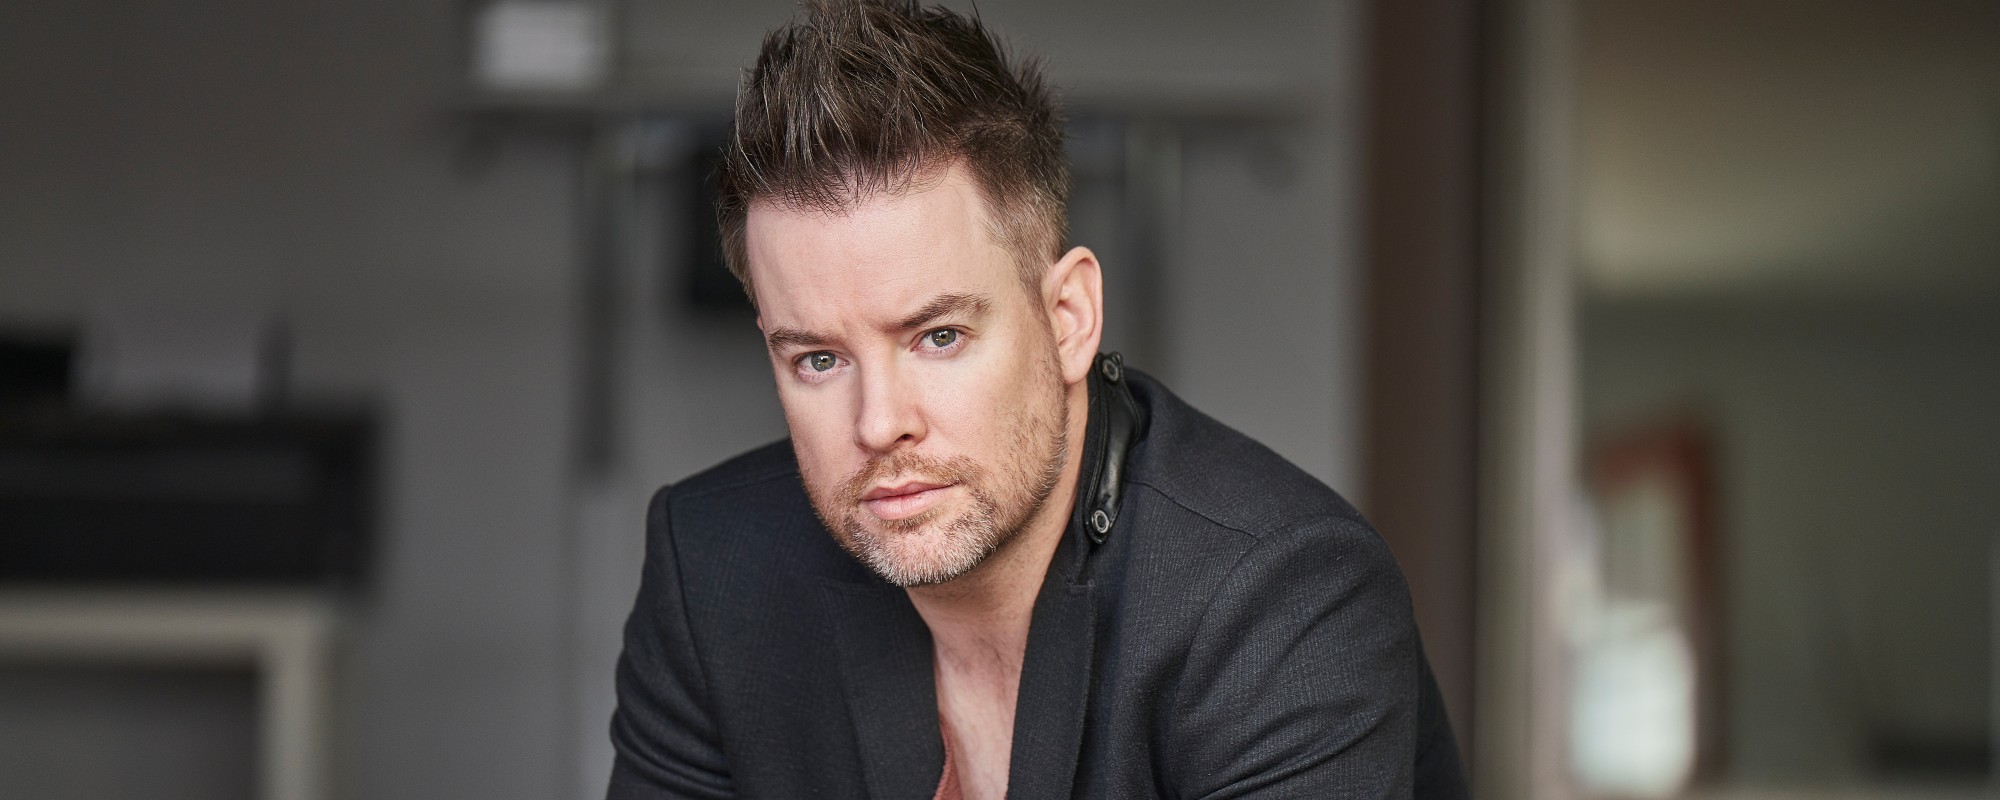 David Cook Holds A Mirror To The World With ‘The Looking Glass’ EP